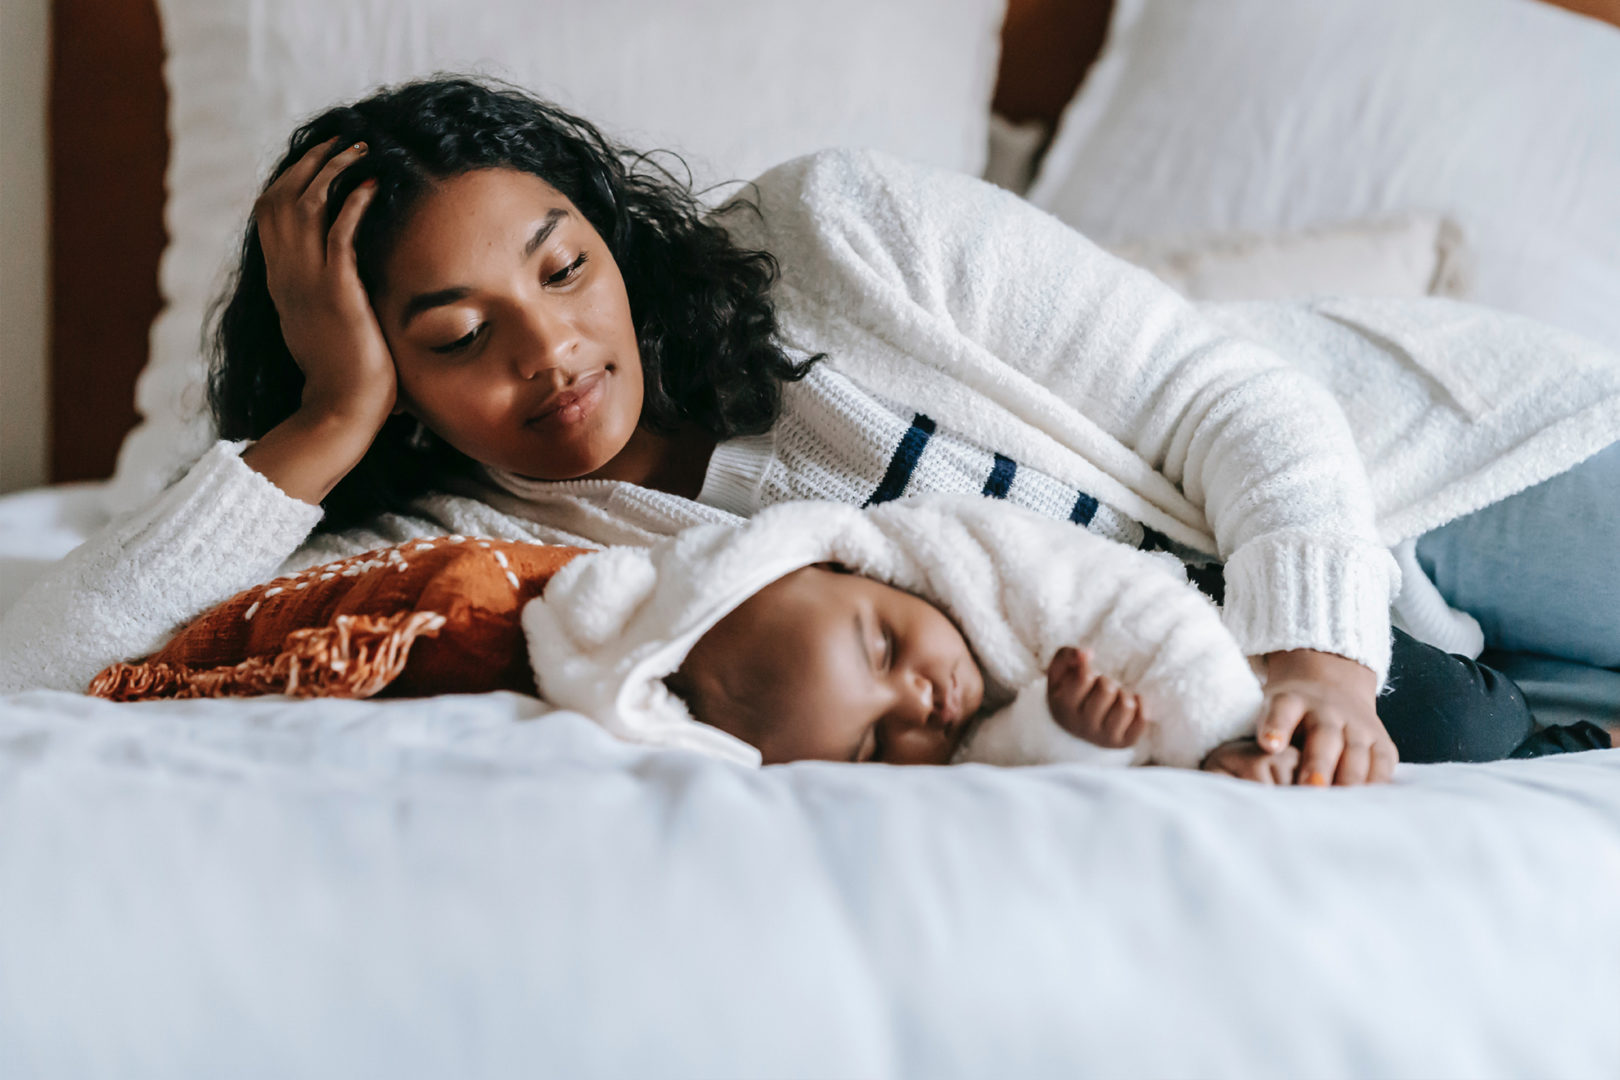 Do Attachment Parents Need a Sleep Consultant?